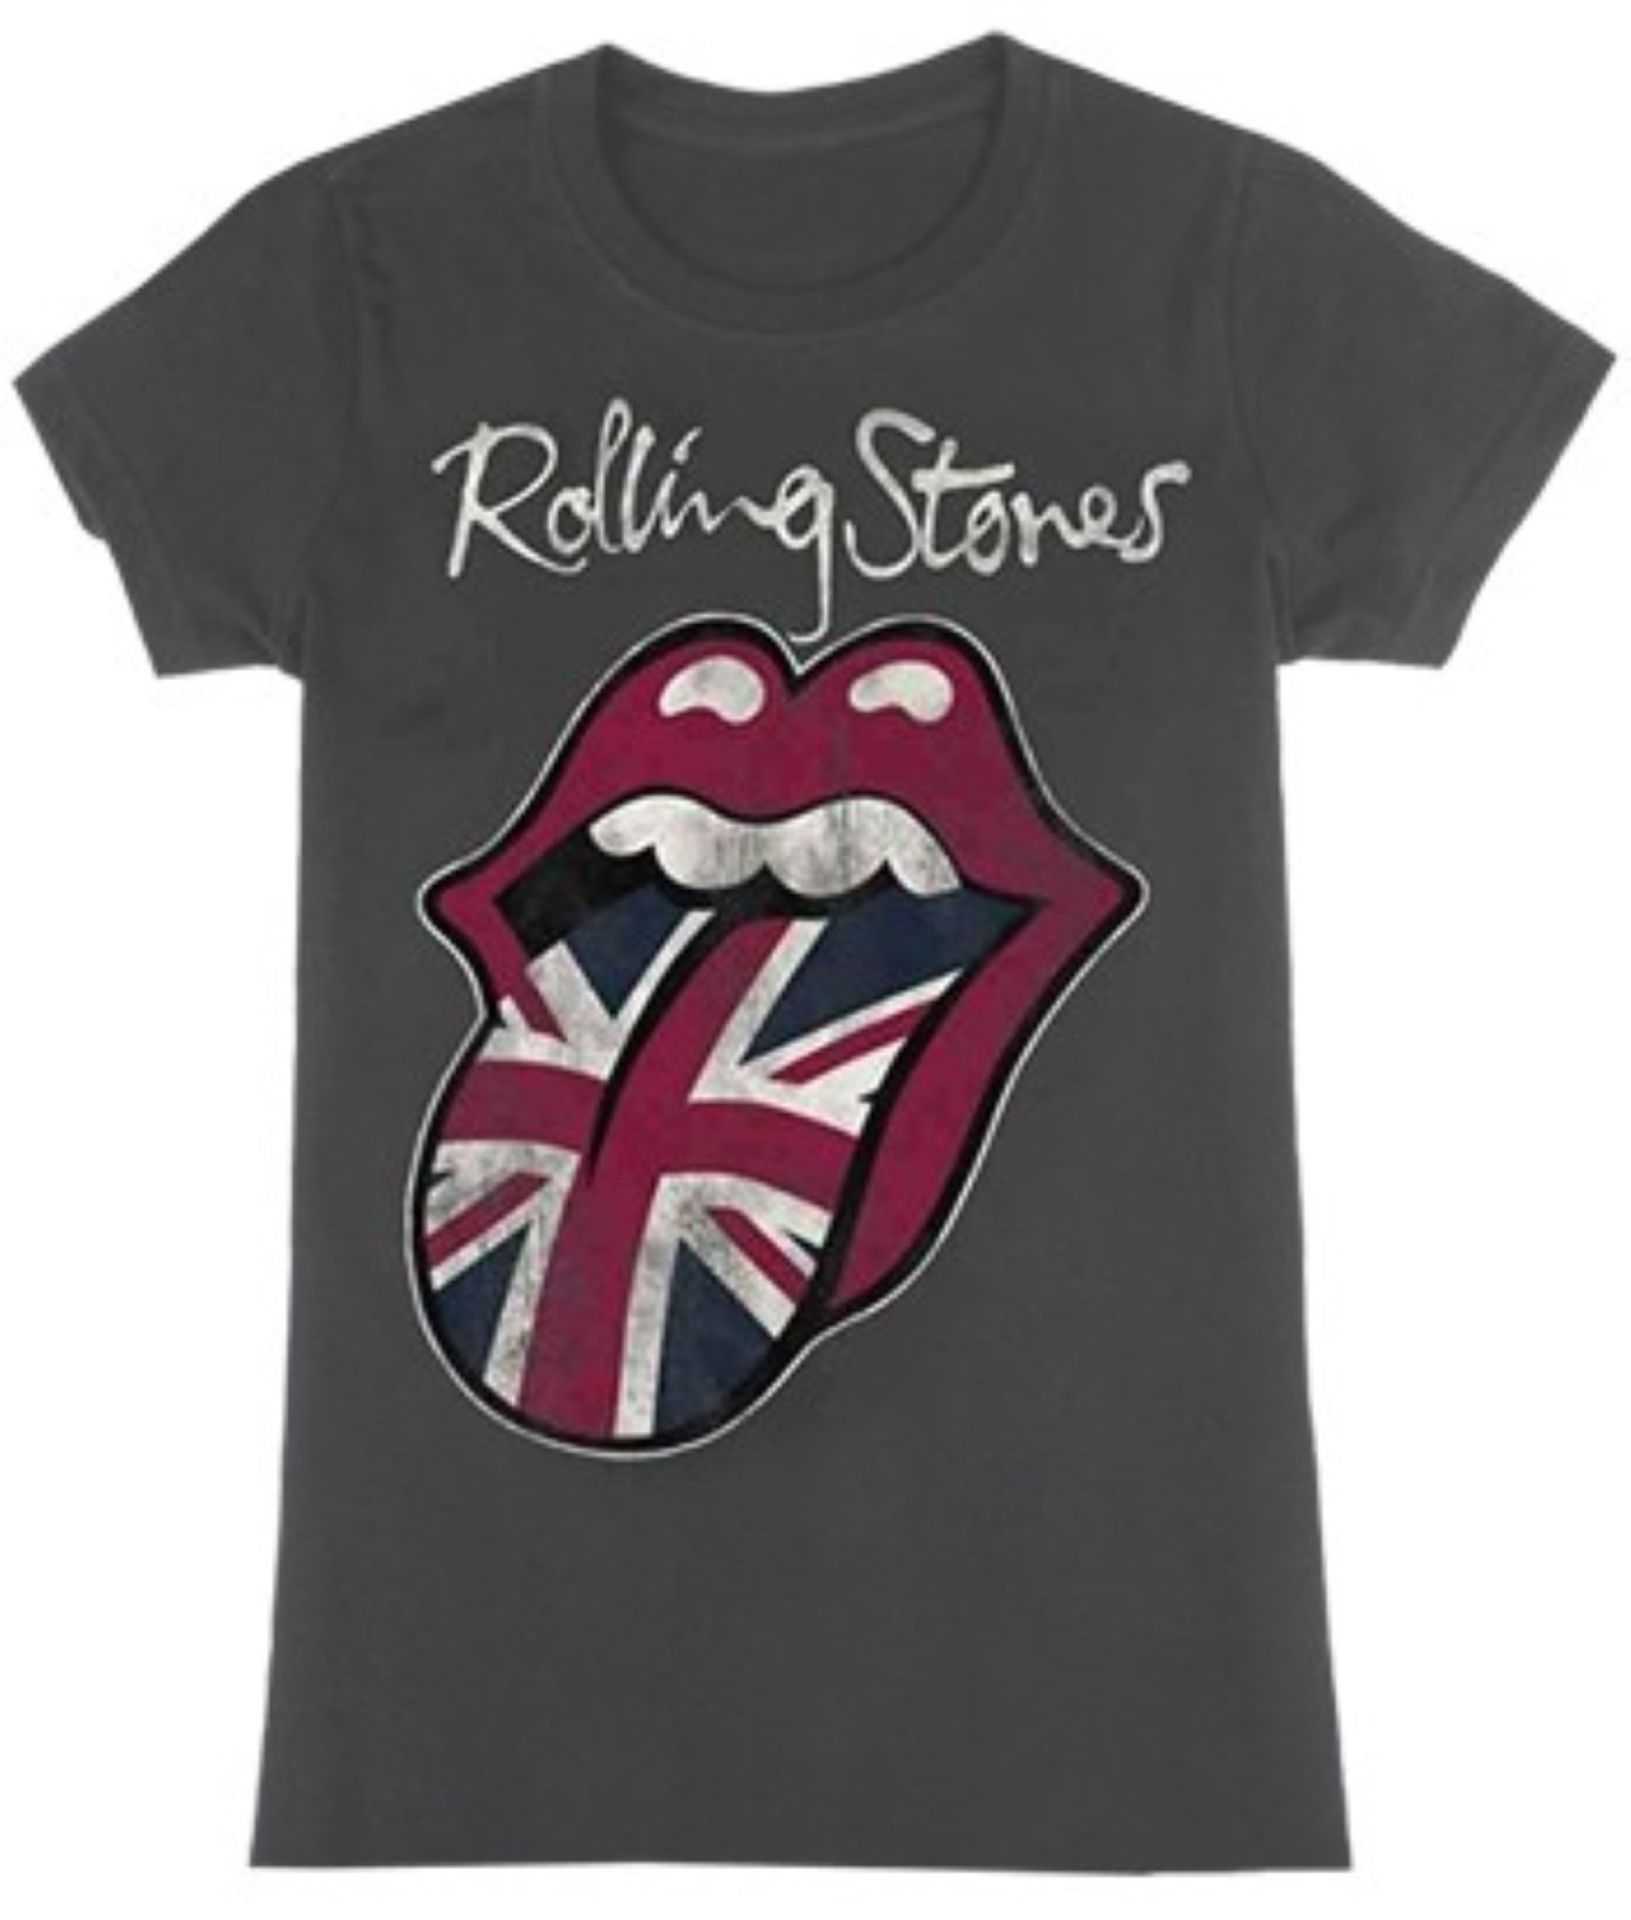 3 x THE ROLLING STONES Various Designs Short Sleeve Ladies T-Shirts - Size: Large - Officially - Image 3 of 8